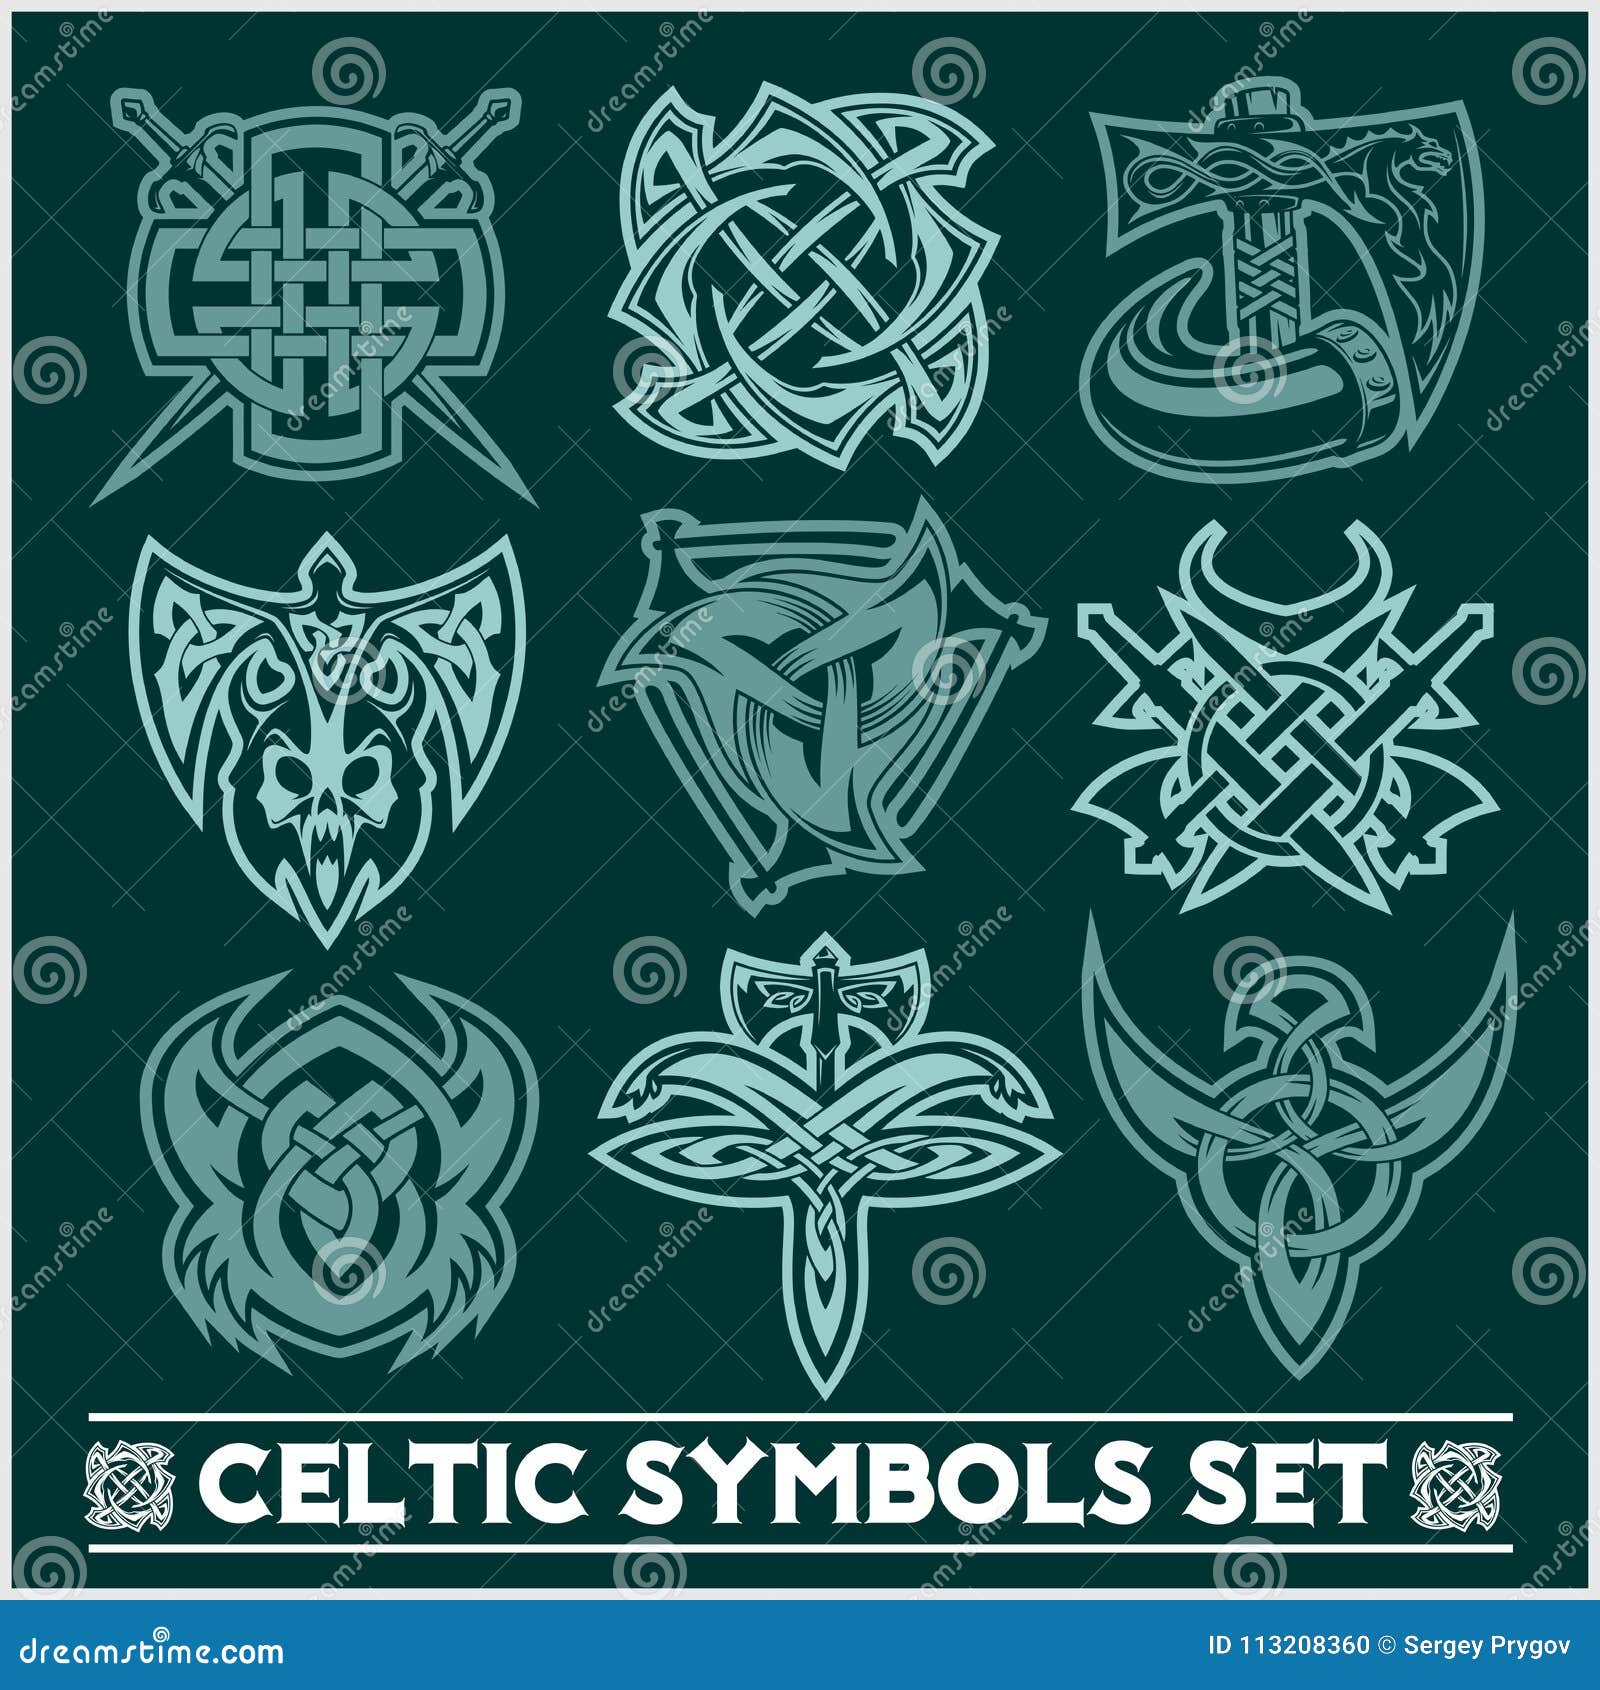 celtic symbols and their meanings for tattoos